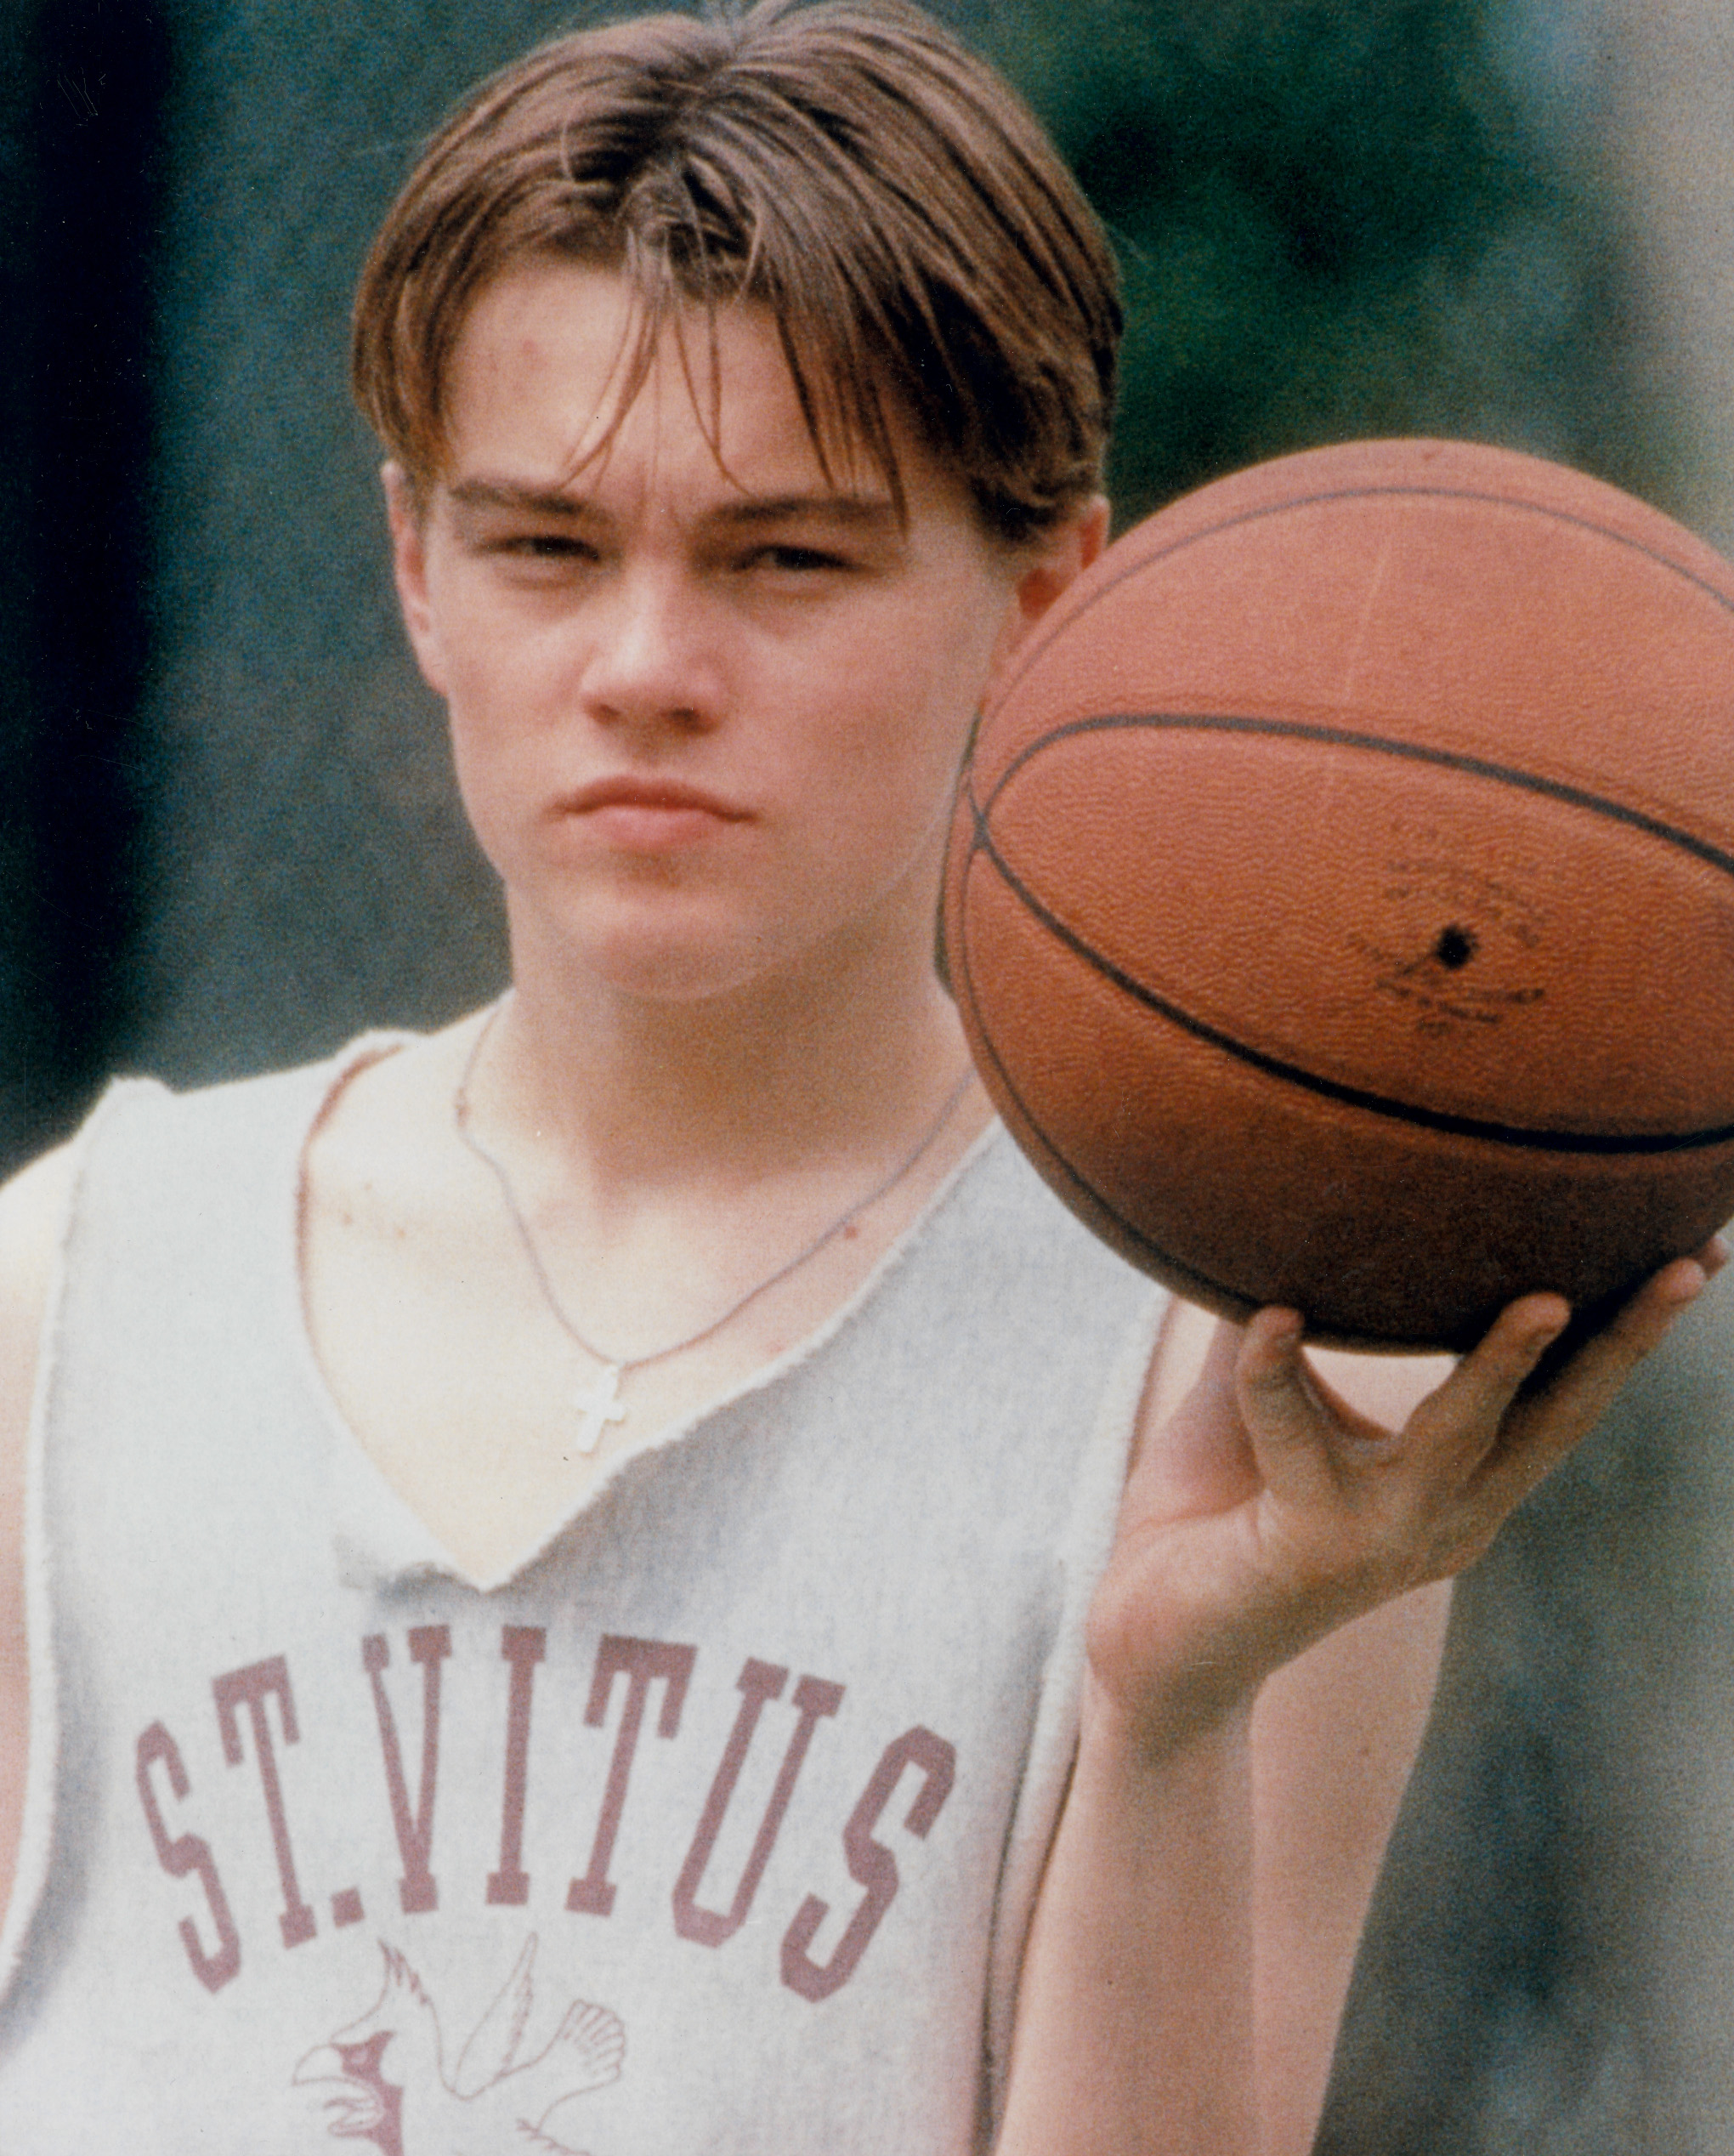 The Basketball Diaries, 1995.